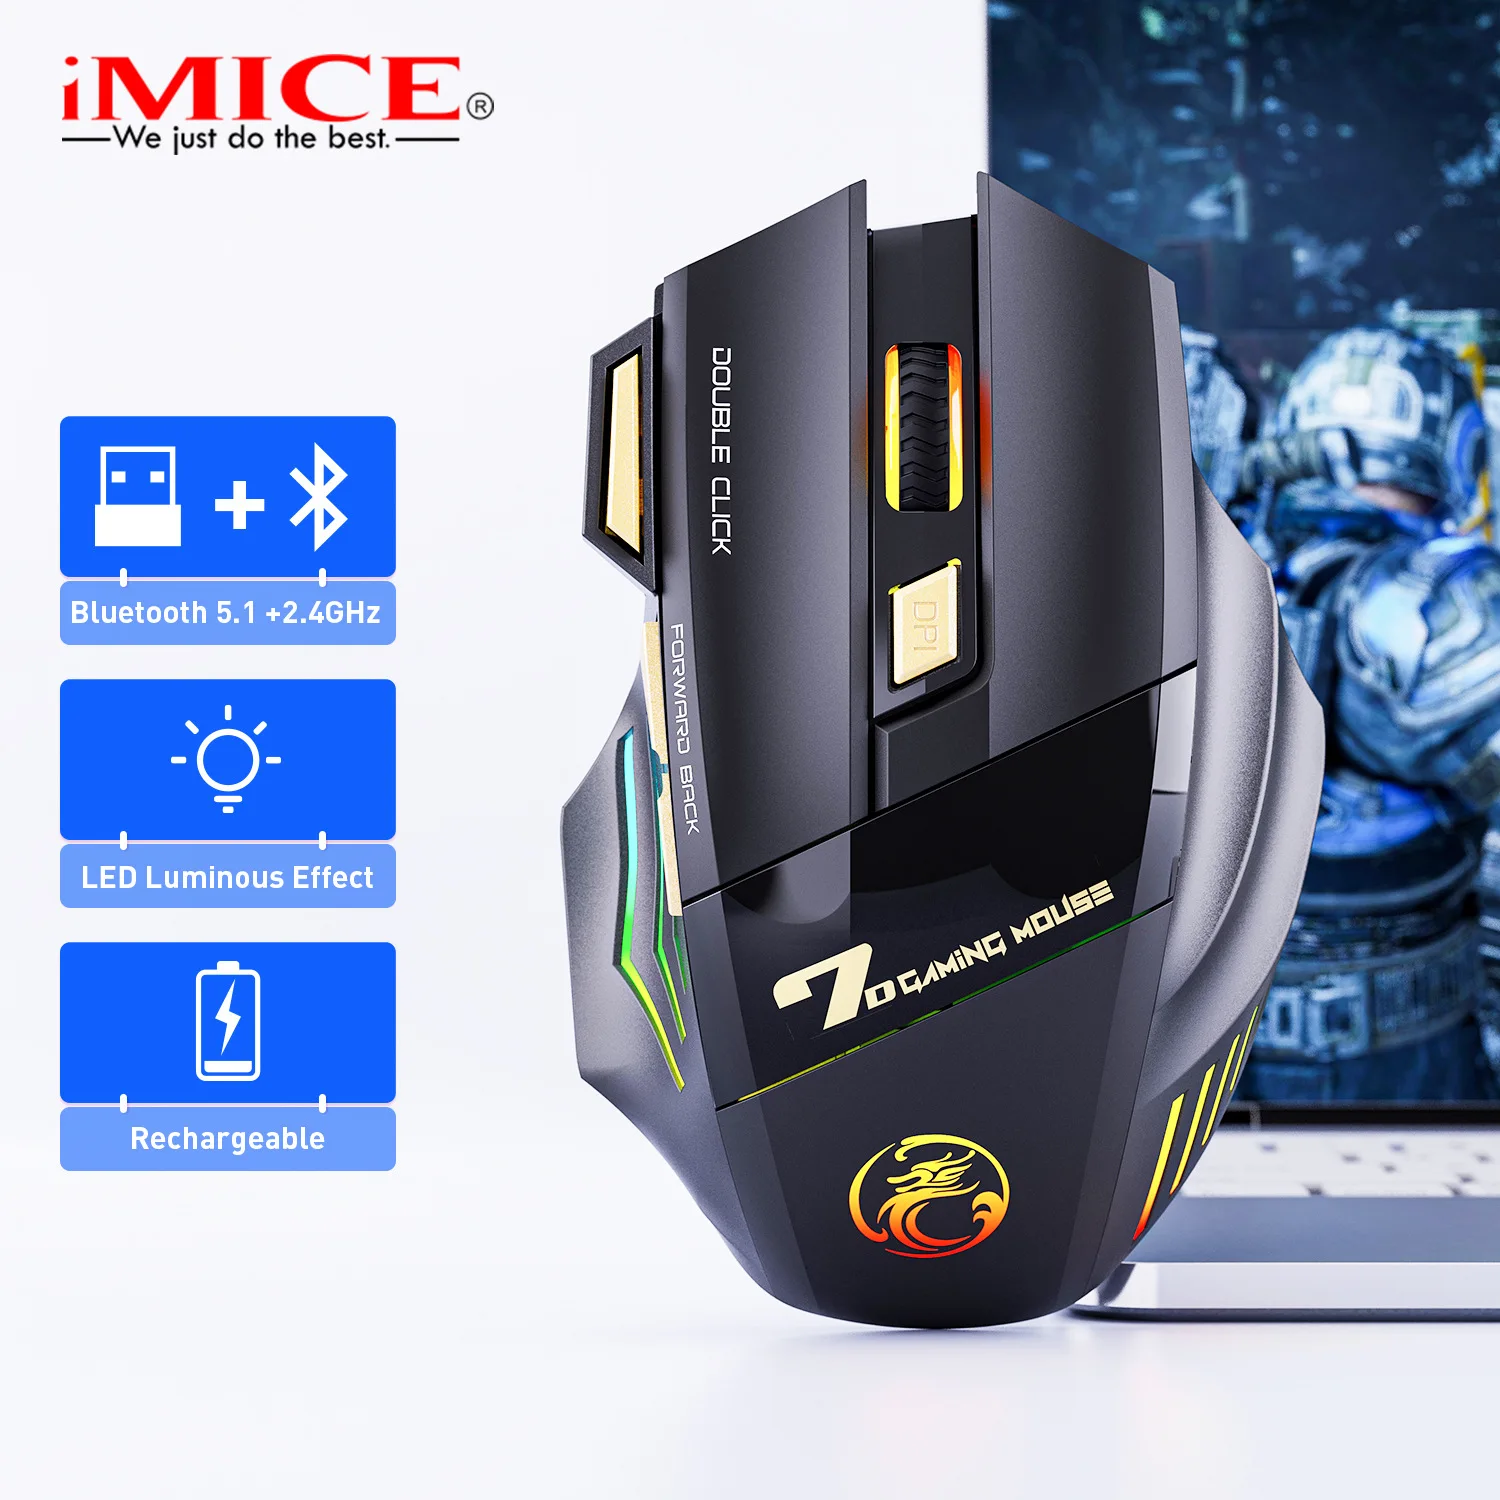 

Wireless Bluetooth 2.4Ghz Mouse Optical Game Wireless Mice RGB LED Backlit Ergonomic USB Mause 7 Button 3200 DPI For Laptop PC